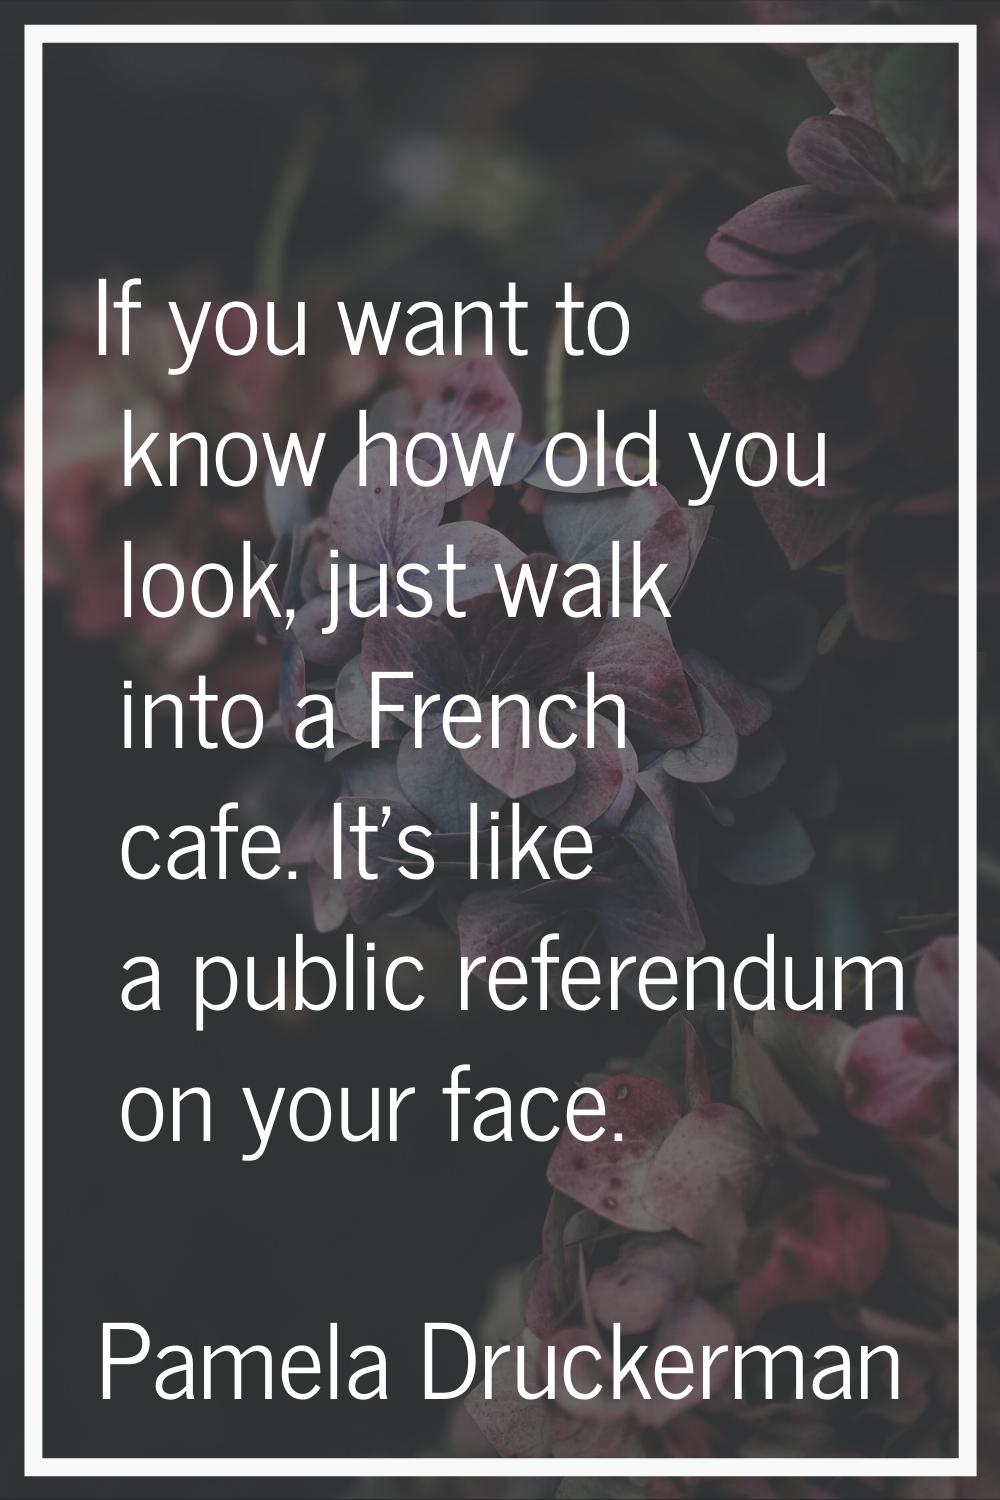 If you want to know how old you look, just walk into a French cafe. It's like a public referendum o